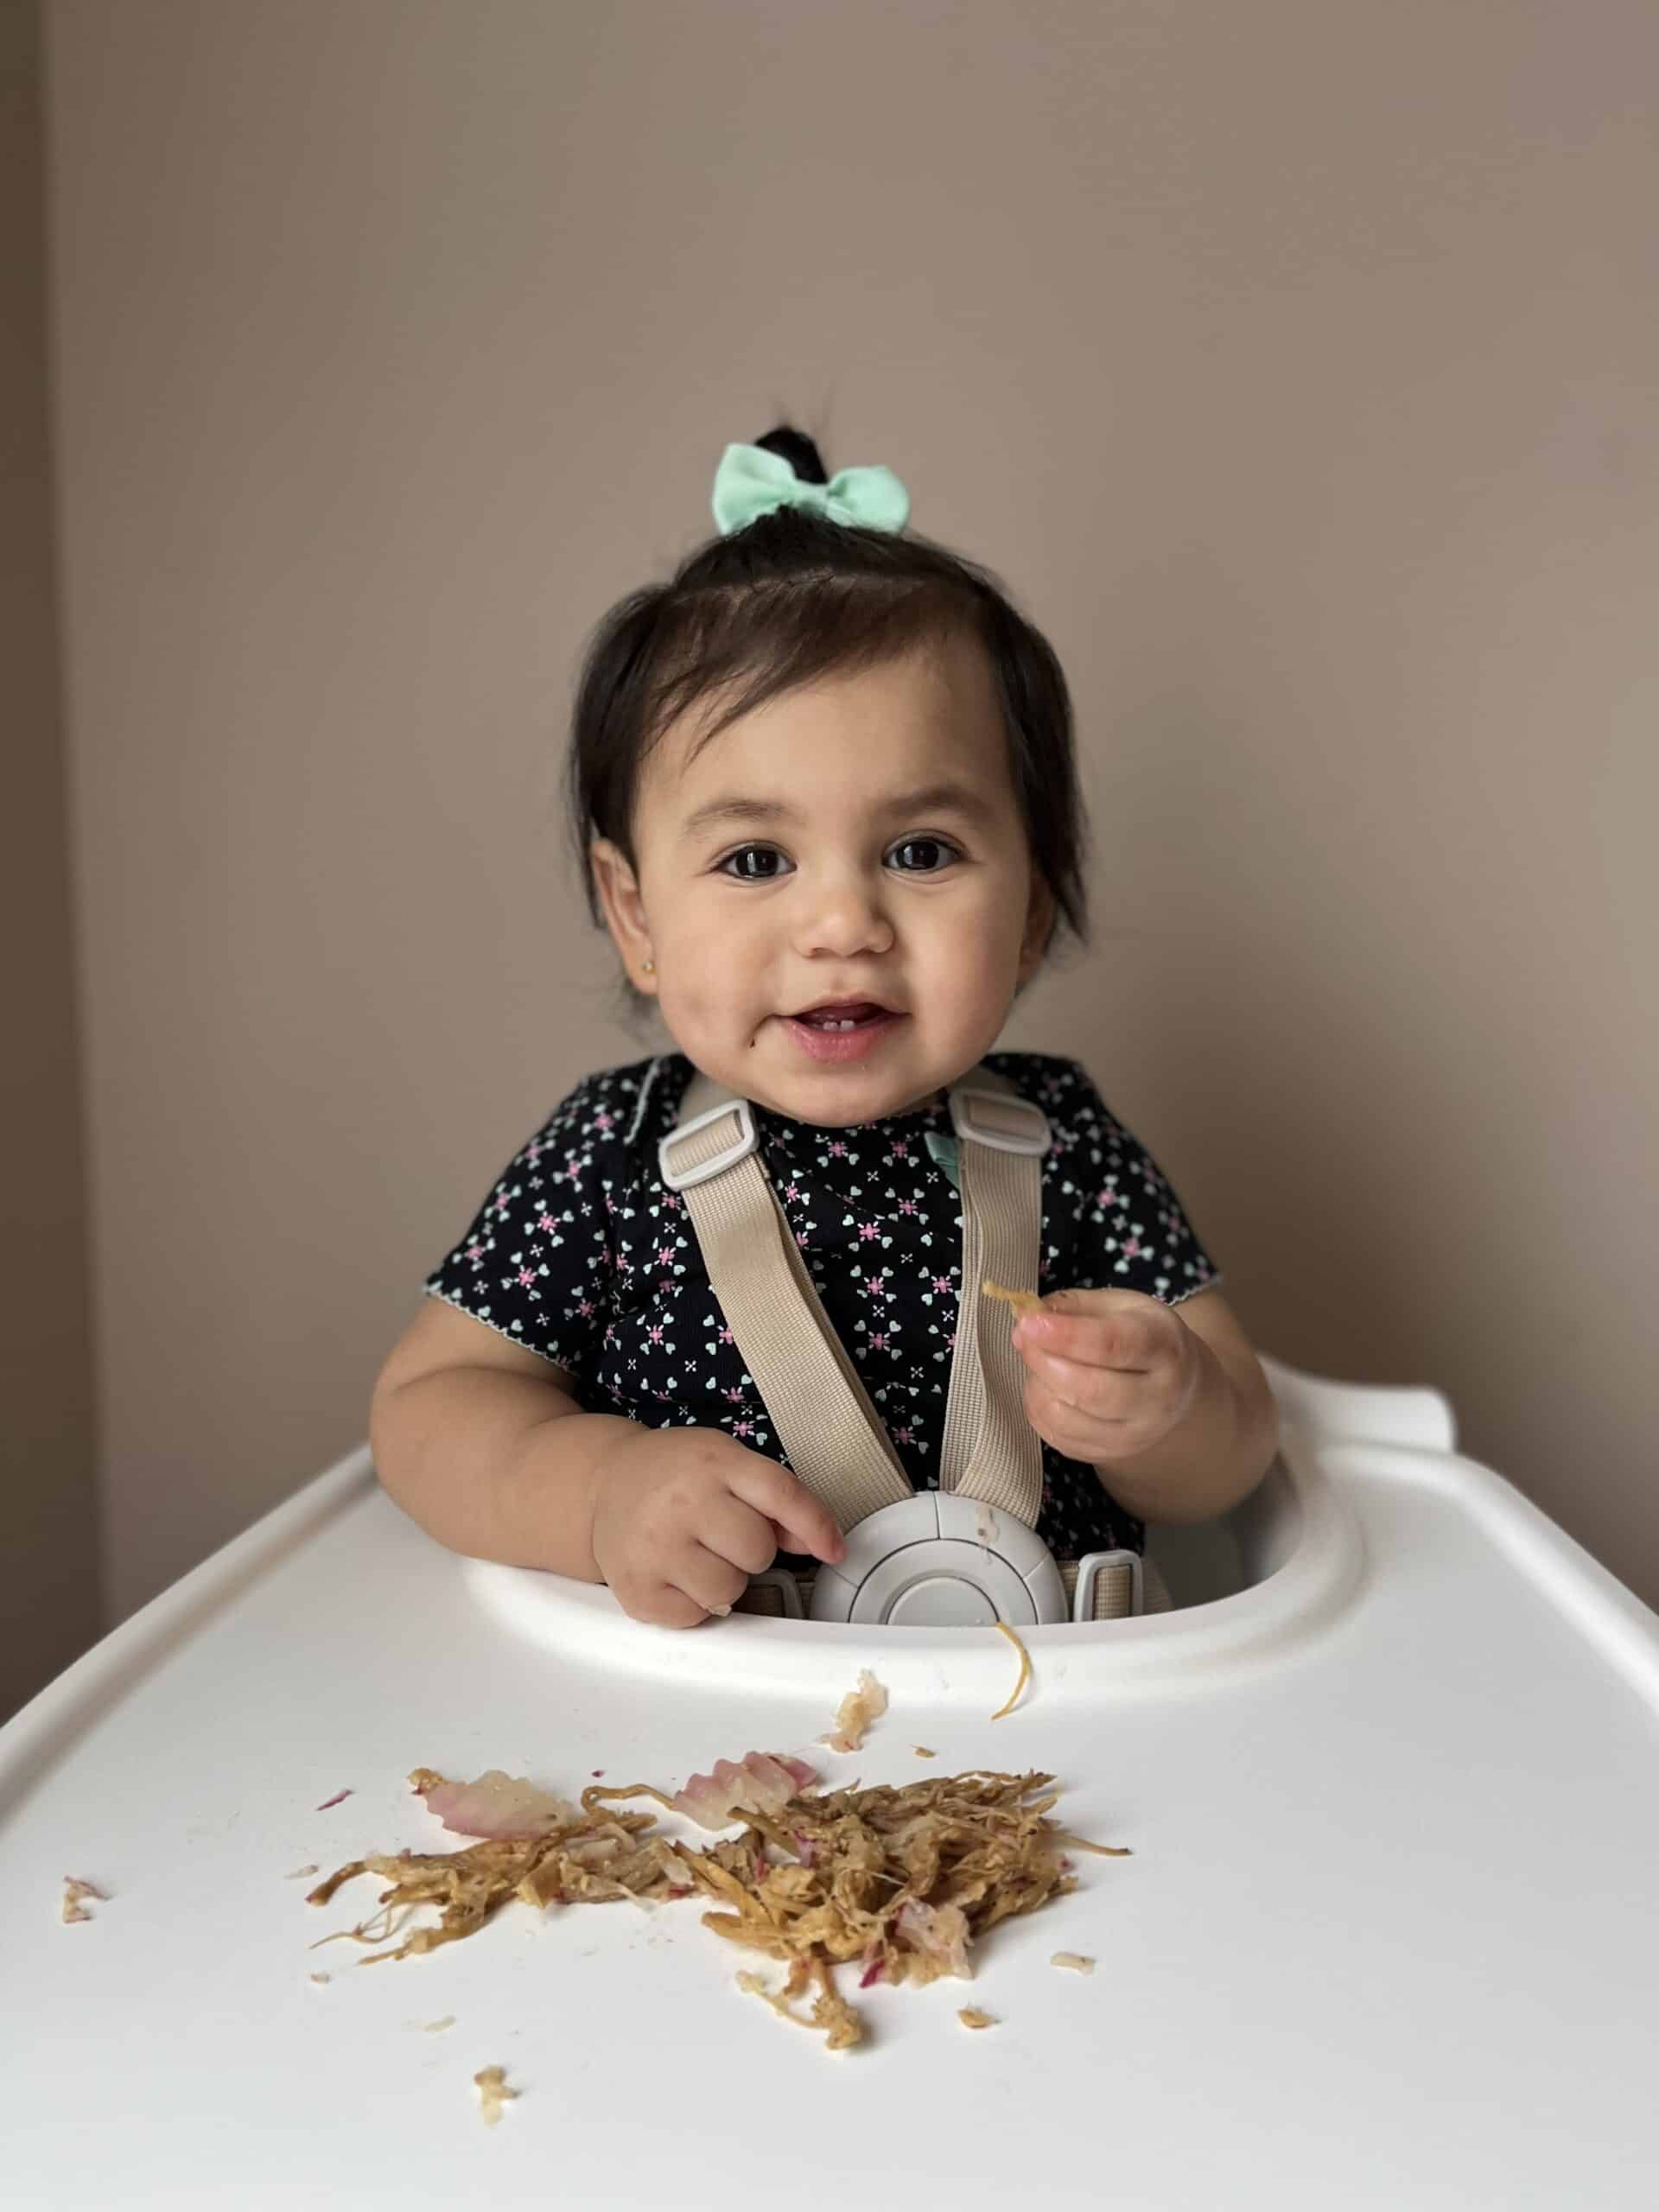 What Is Baby-Led Weaning? Benefits, Tips, and First Foods